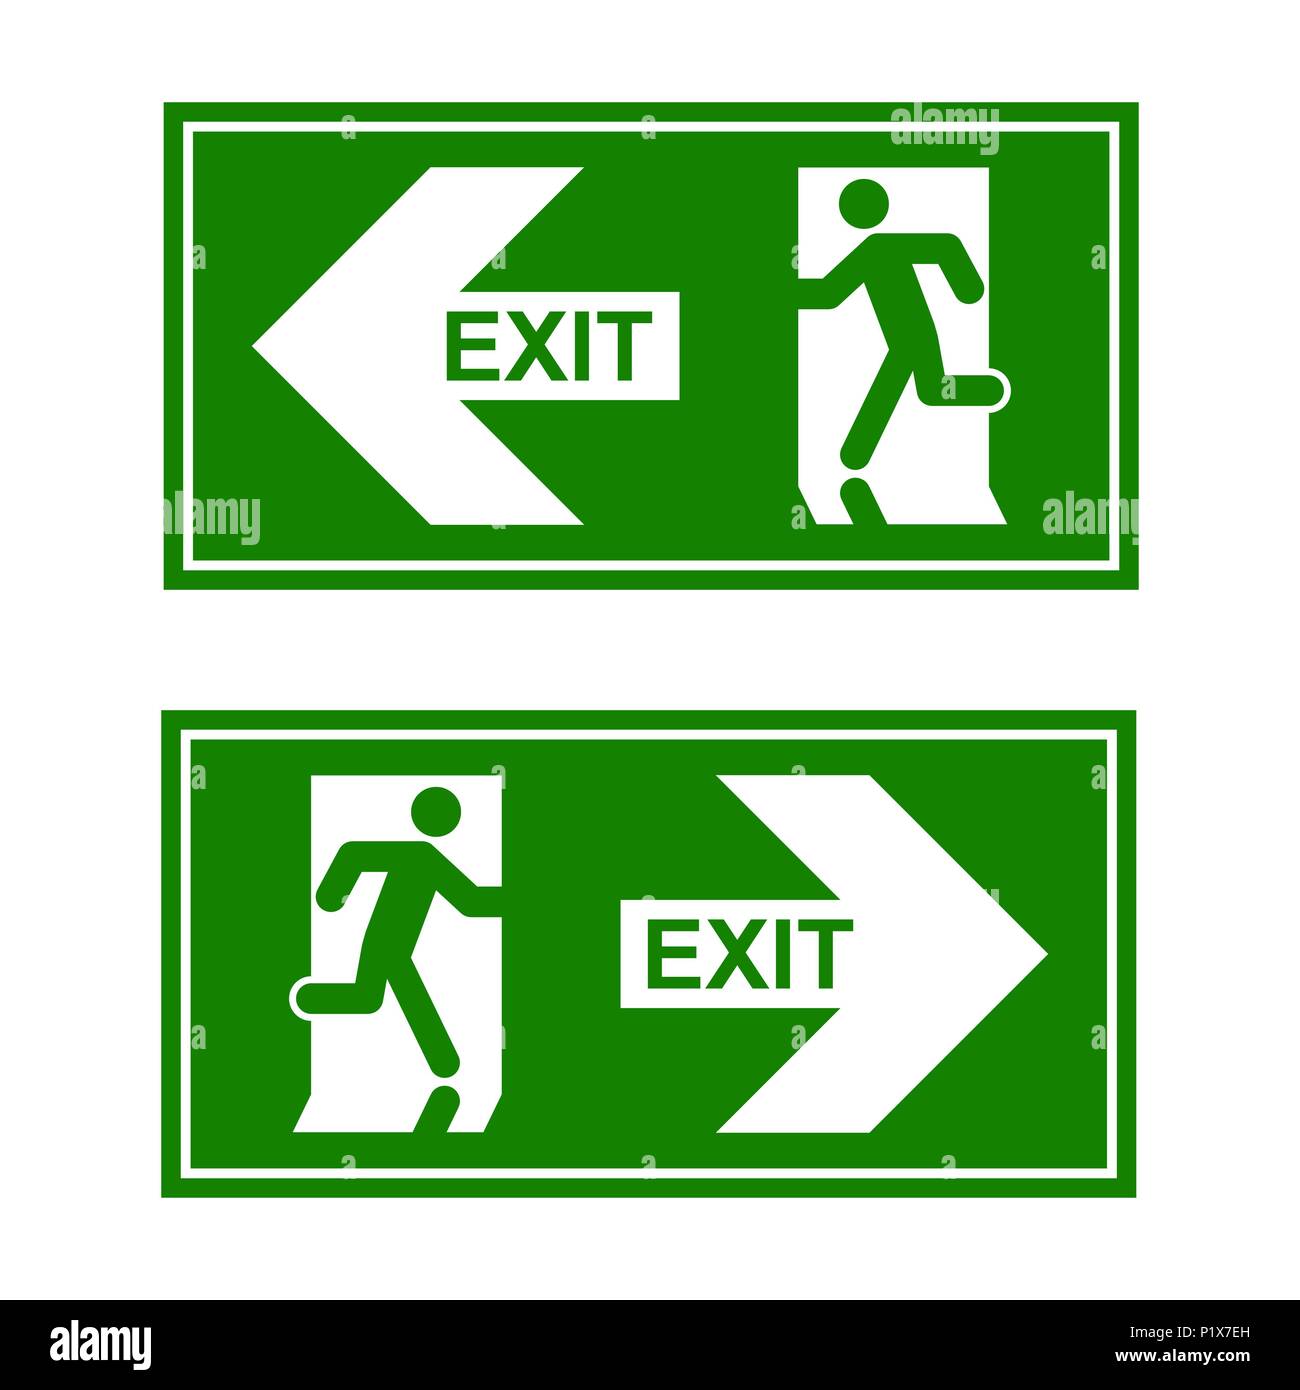 Emergency exit sign. Man running out fire exit. Stock Vector